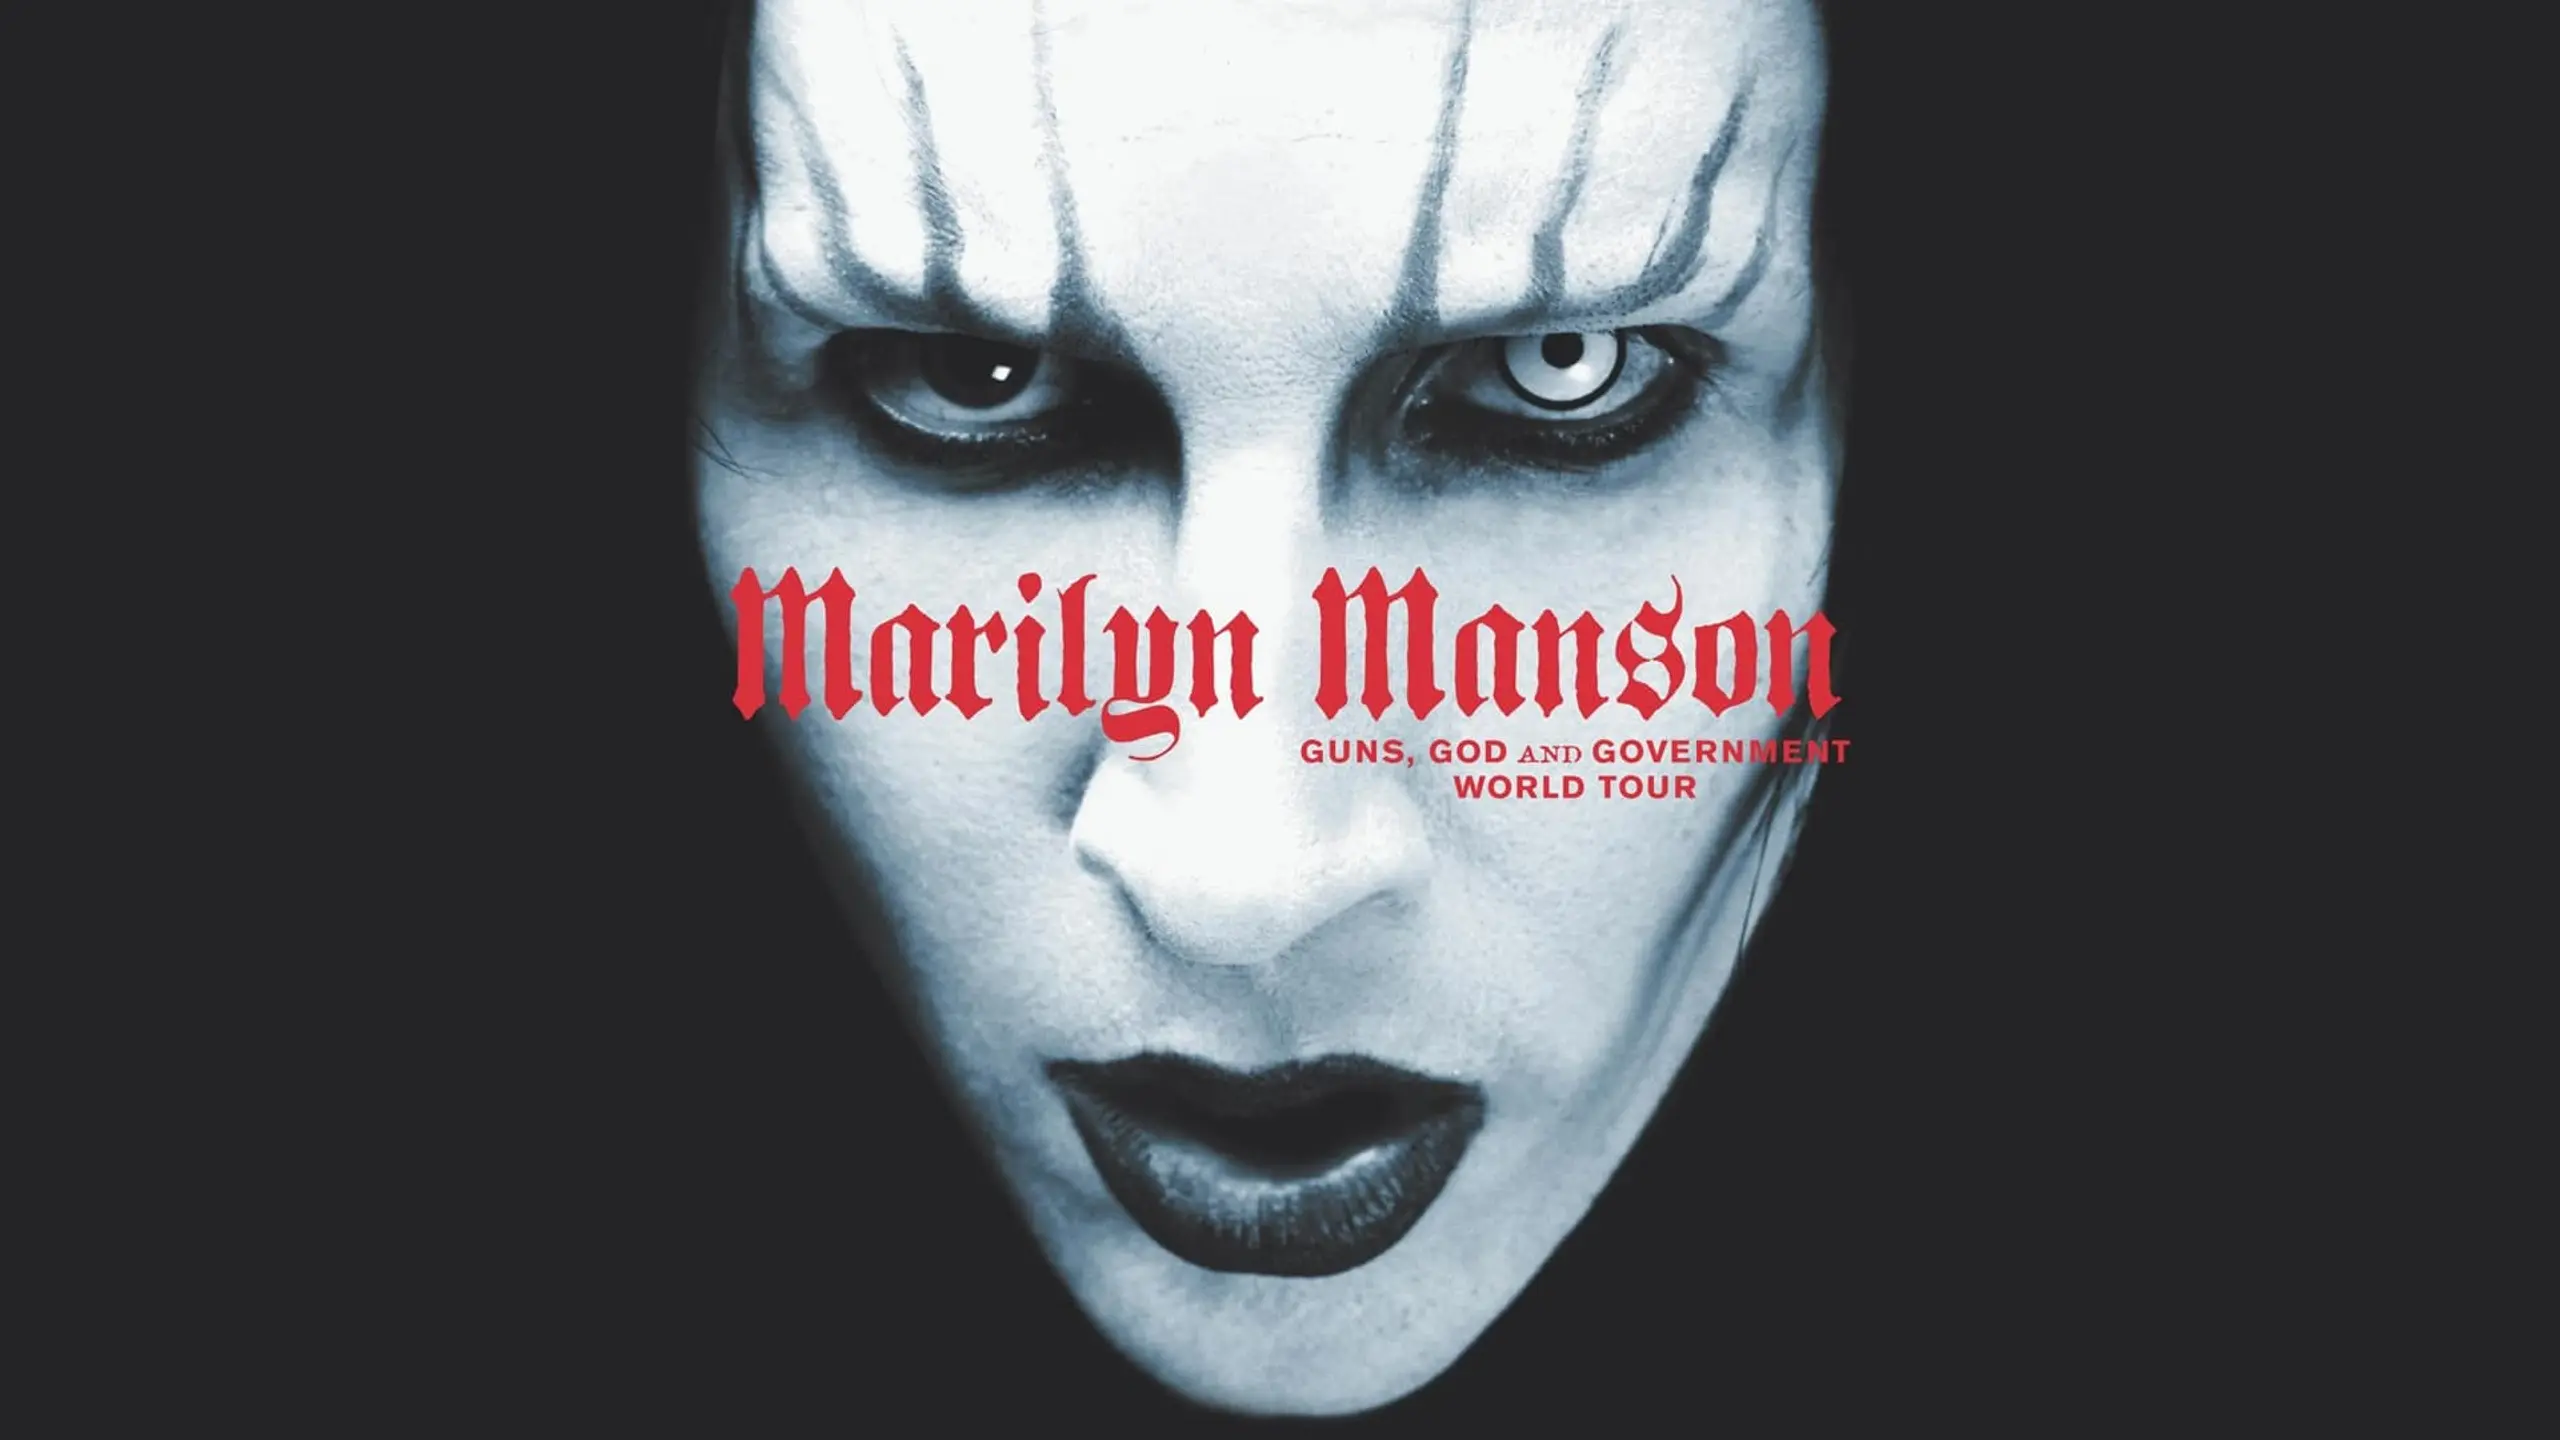 Marilyn Manson: Guns, God and Government World Tour